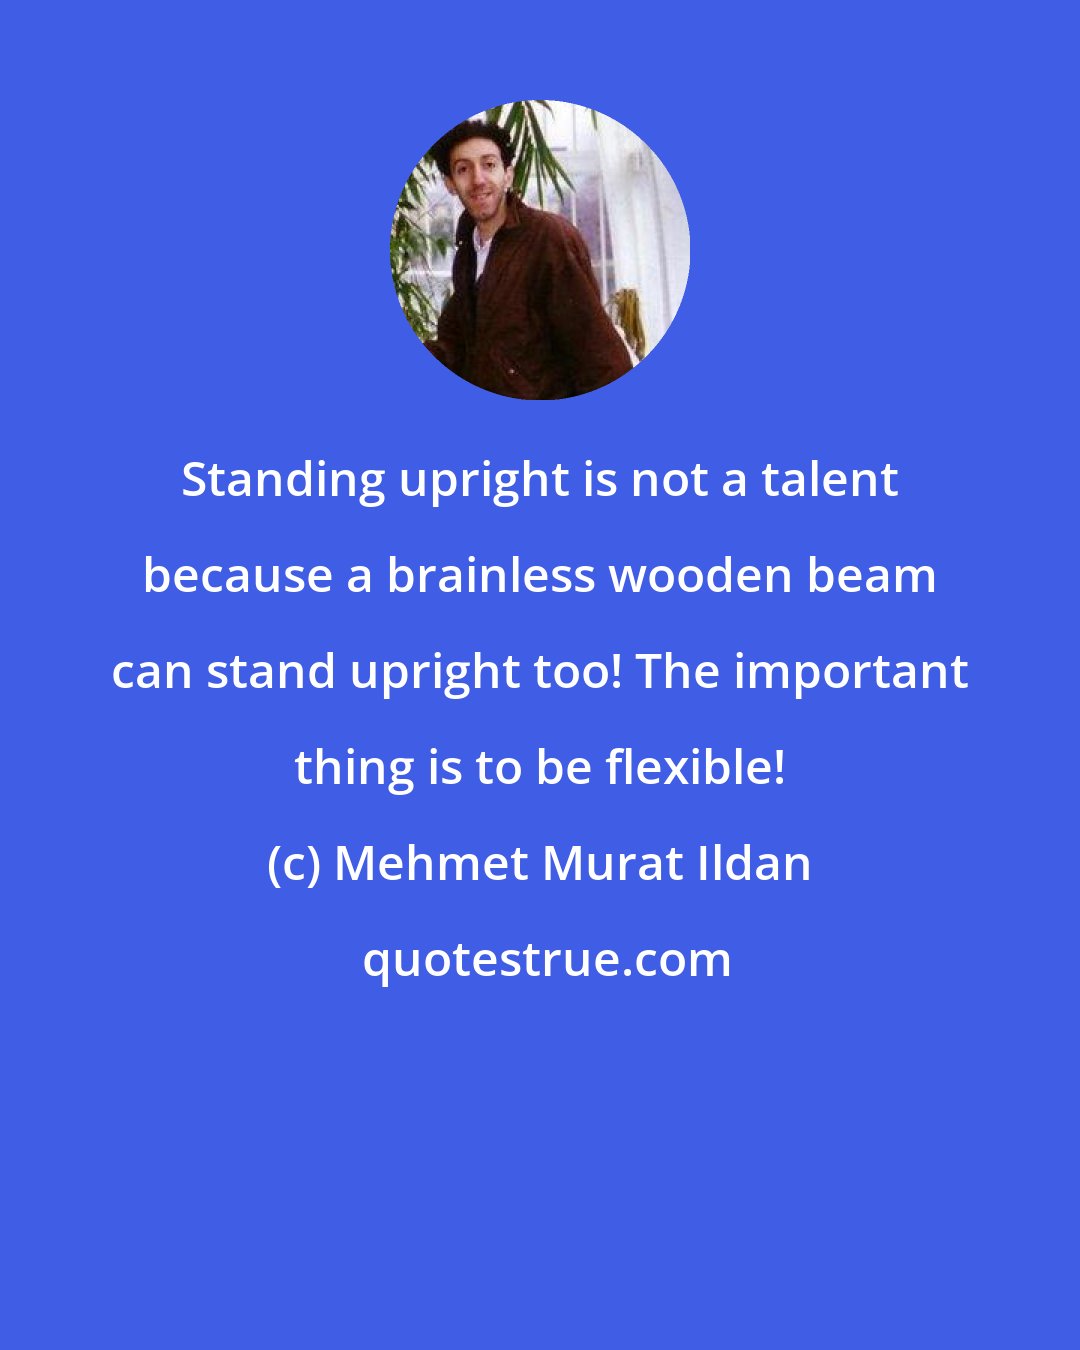 Mehmet Murat Ildan: Standing upright is not a talent because a brainless wooden beam can stand upright too! The important thing is to be flexible!